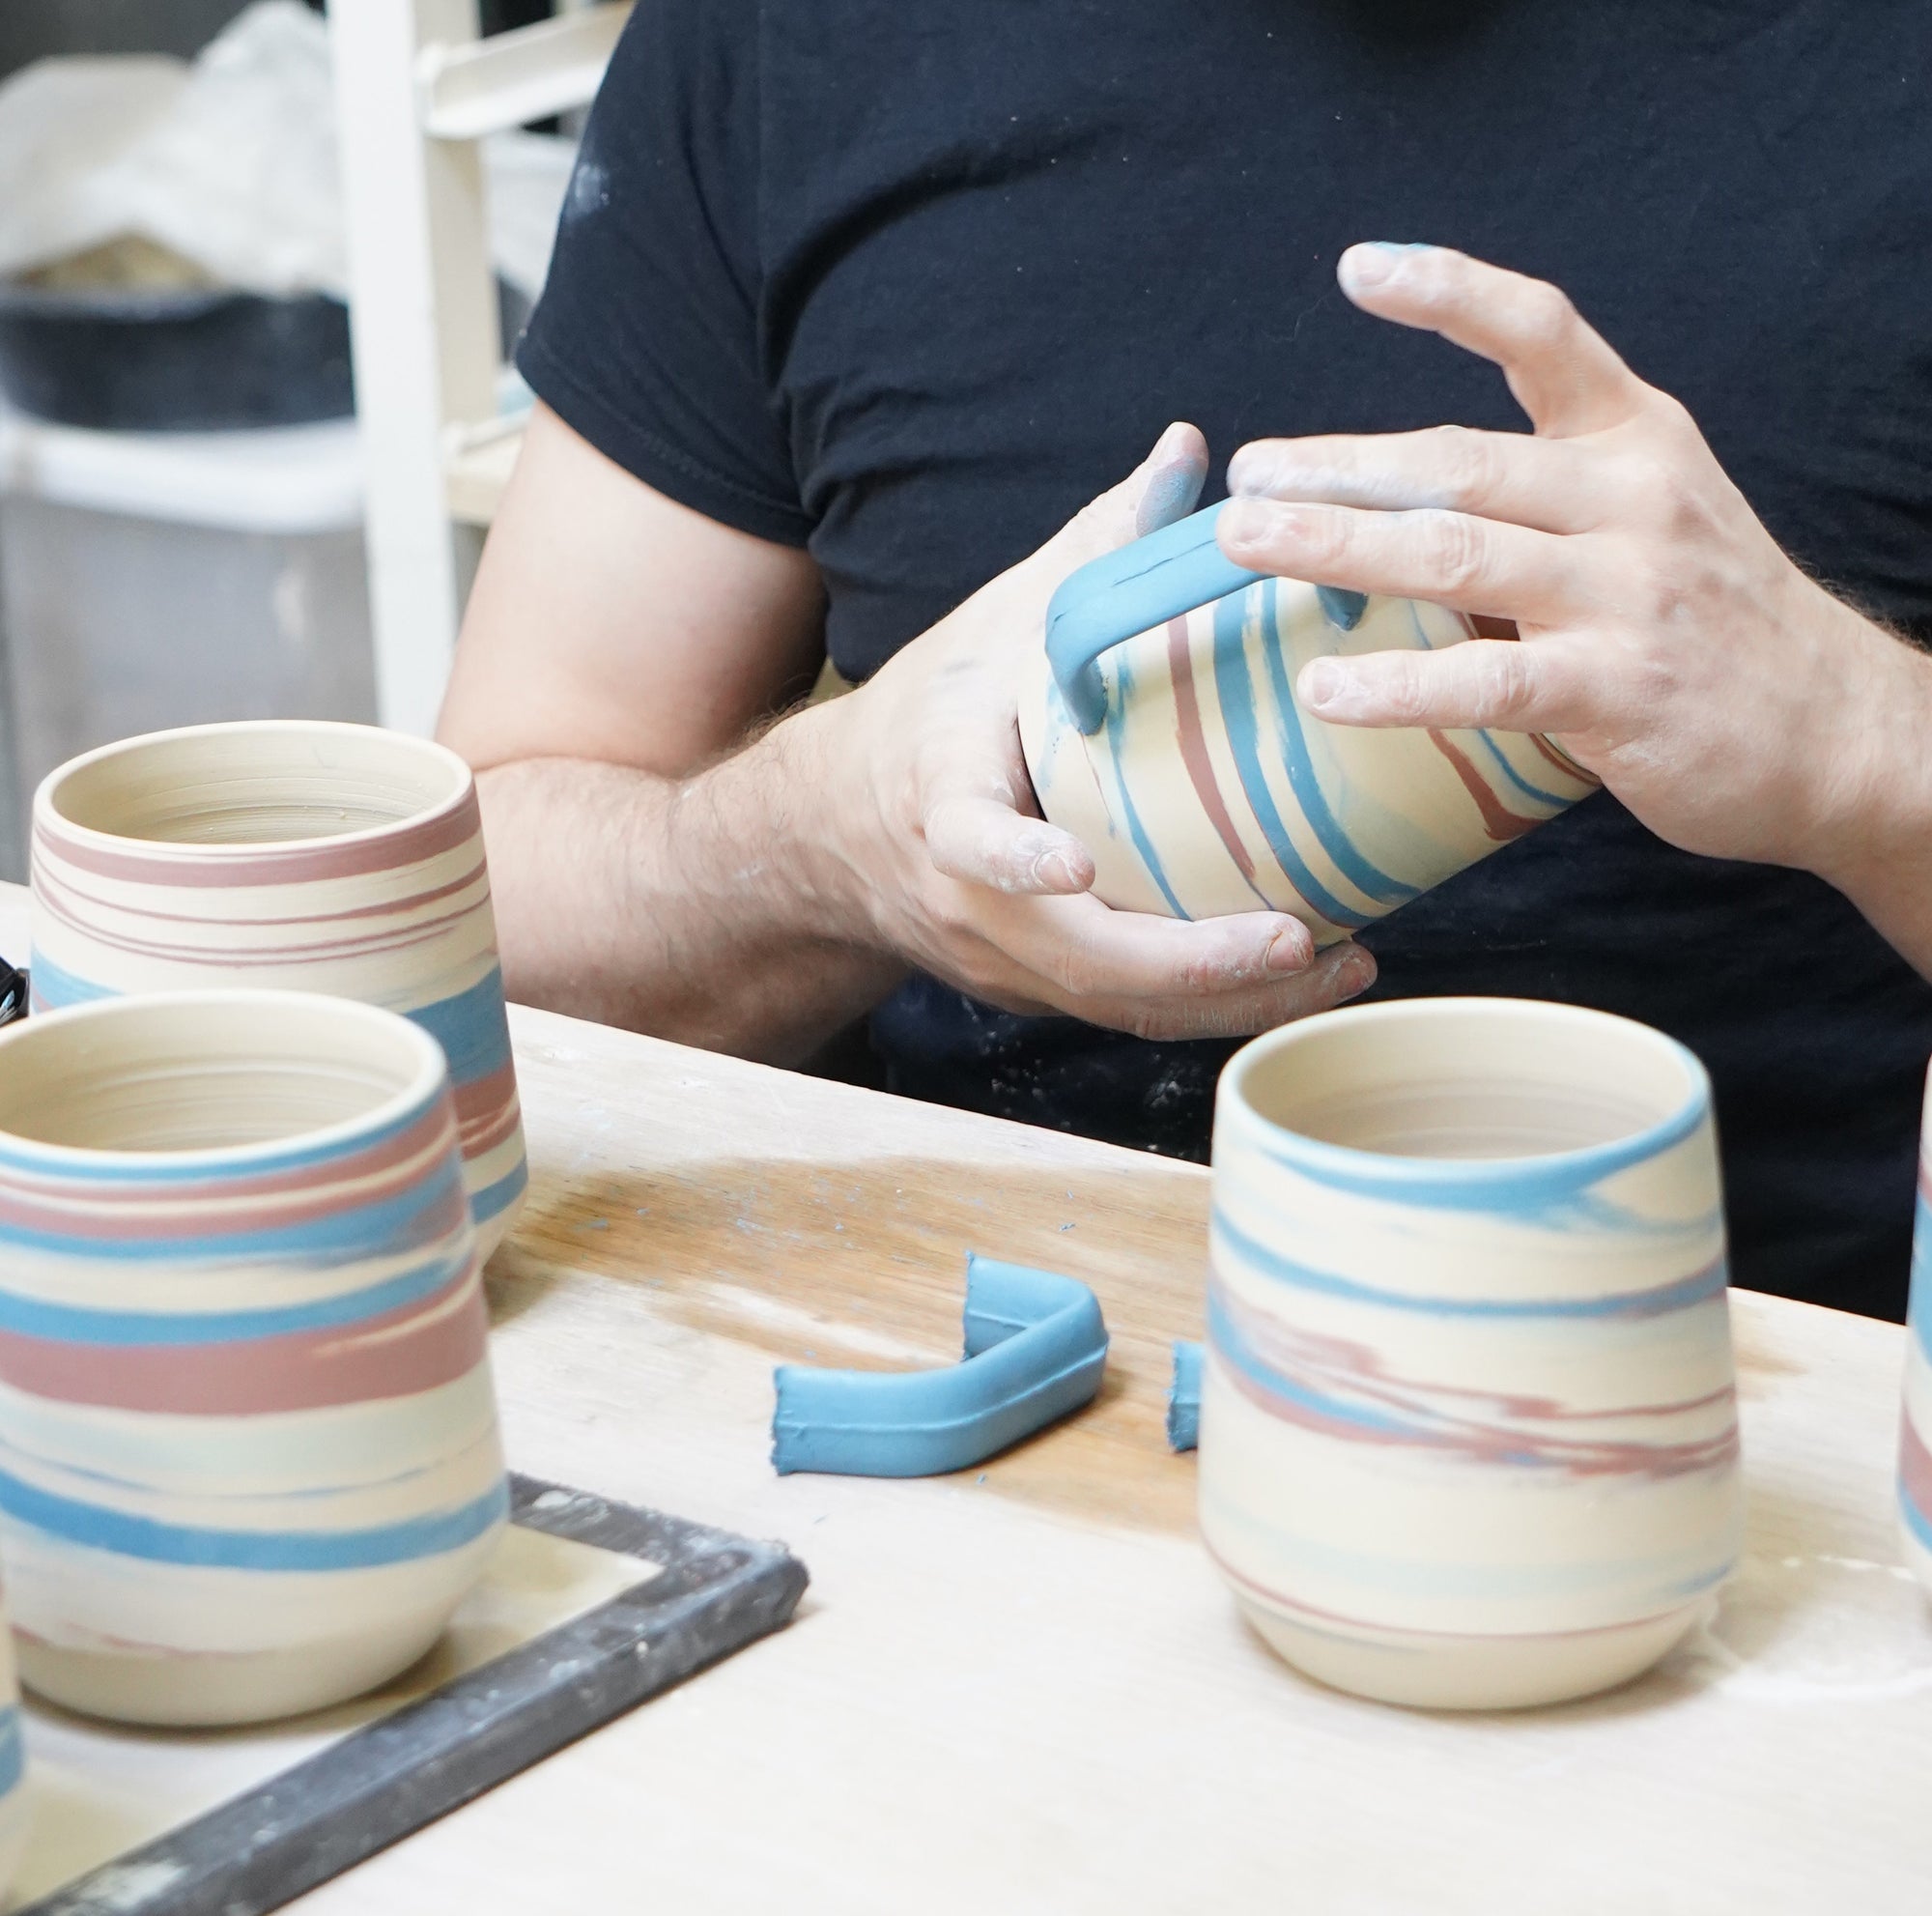 Clay Factor Ceramics teams up with Ecletticos to produce two exclusive and limited-edition color variants of the Taffy Coffee Mug